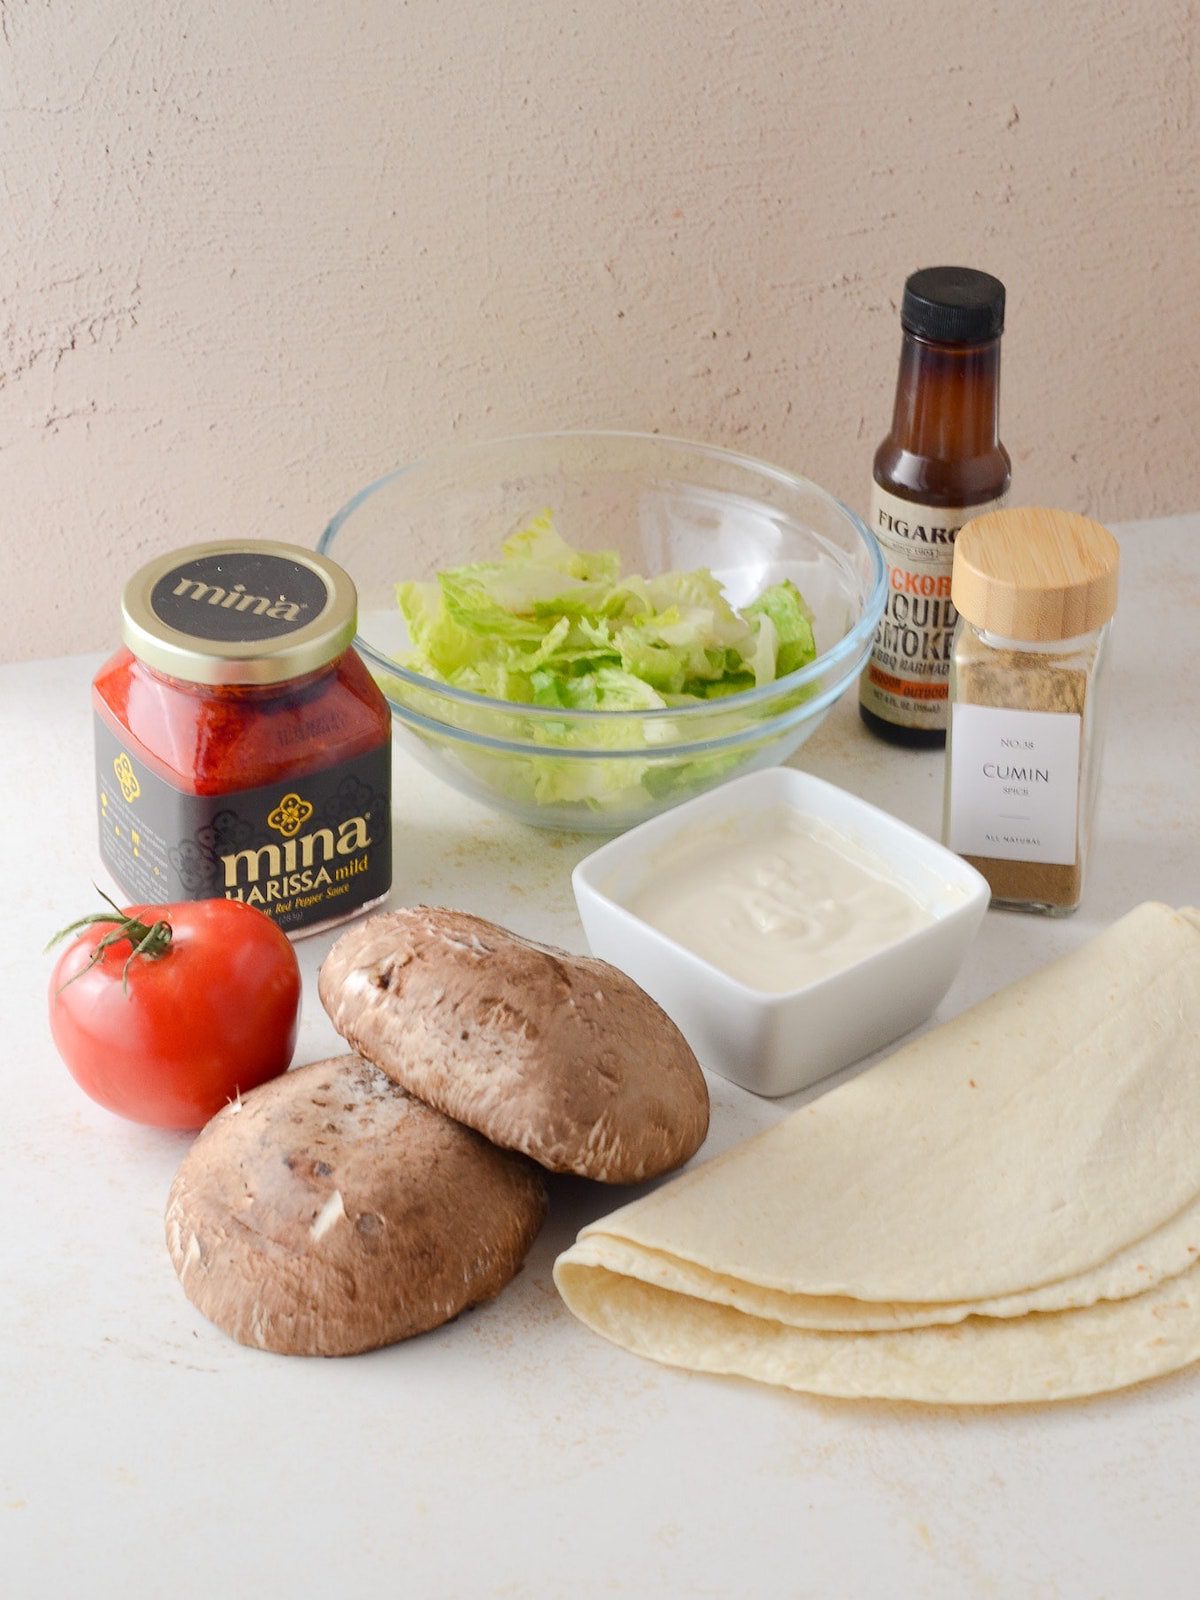 This is a photo of the ingredients for the wrap.